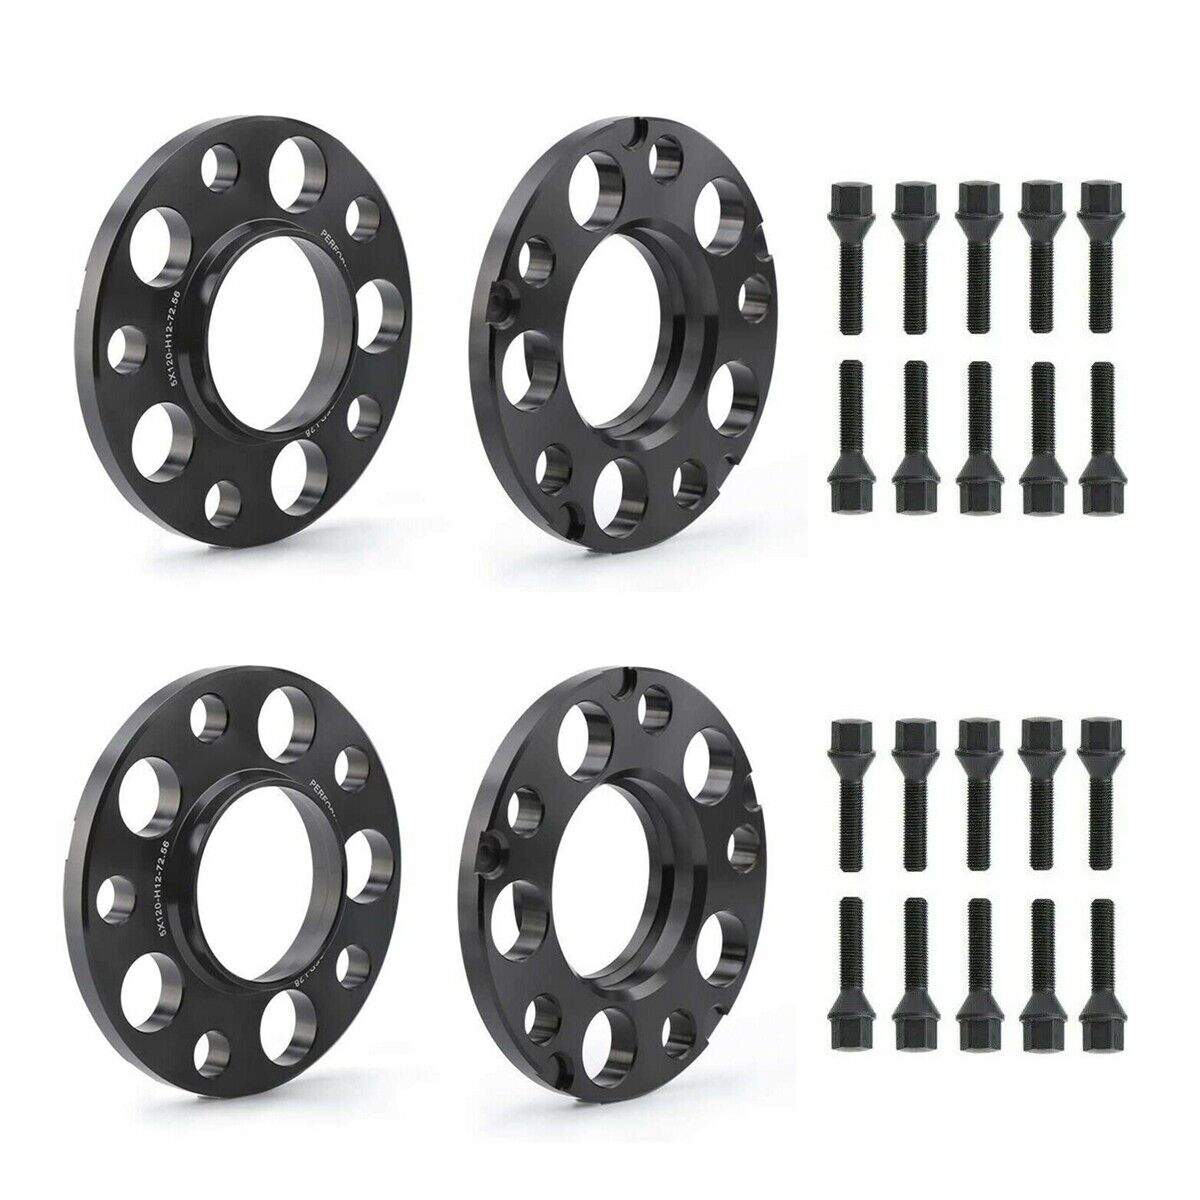 5x120 Staggered Wheel Spacers Kit (2) 12mm & (2) 15mm W/ Extended Bolts Fits BMW